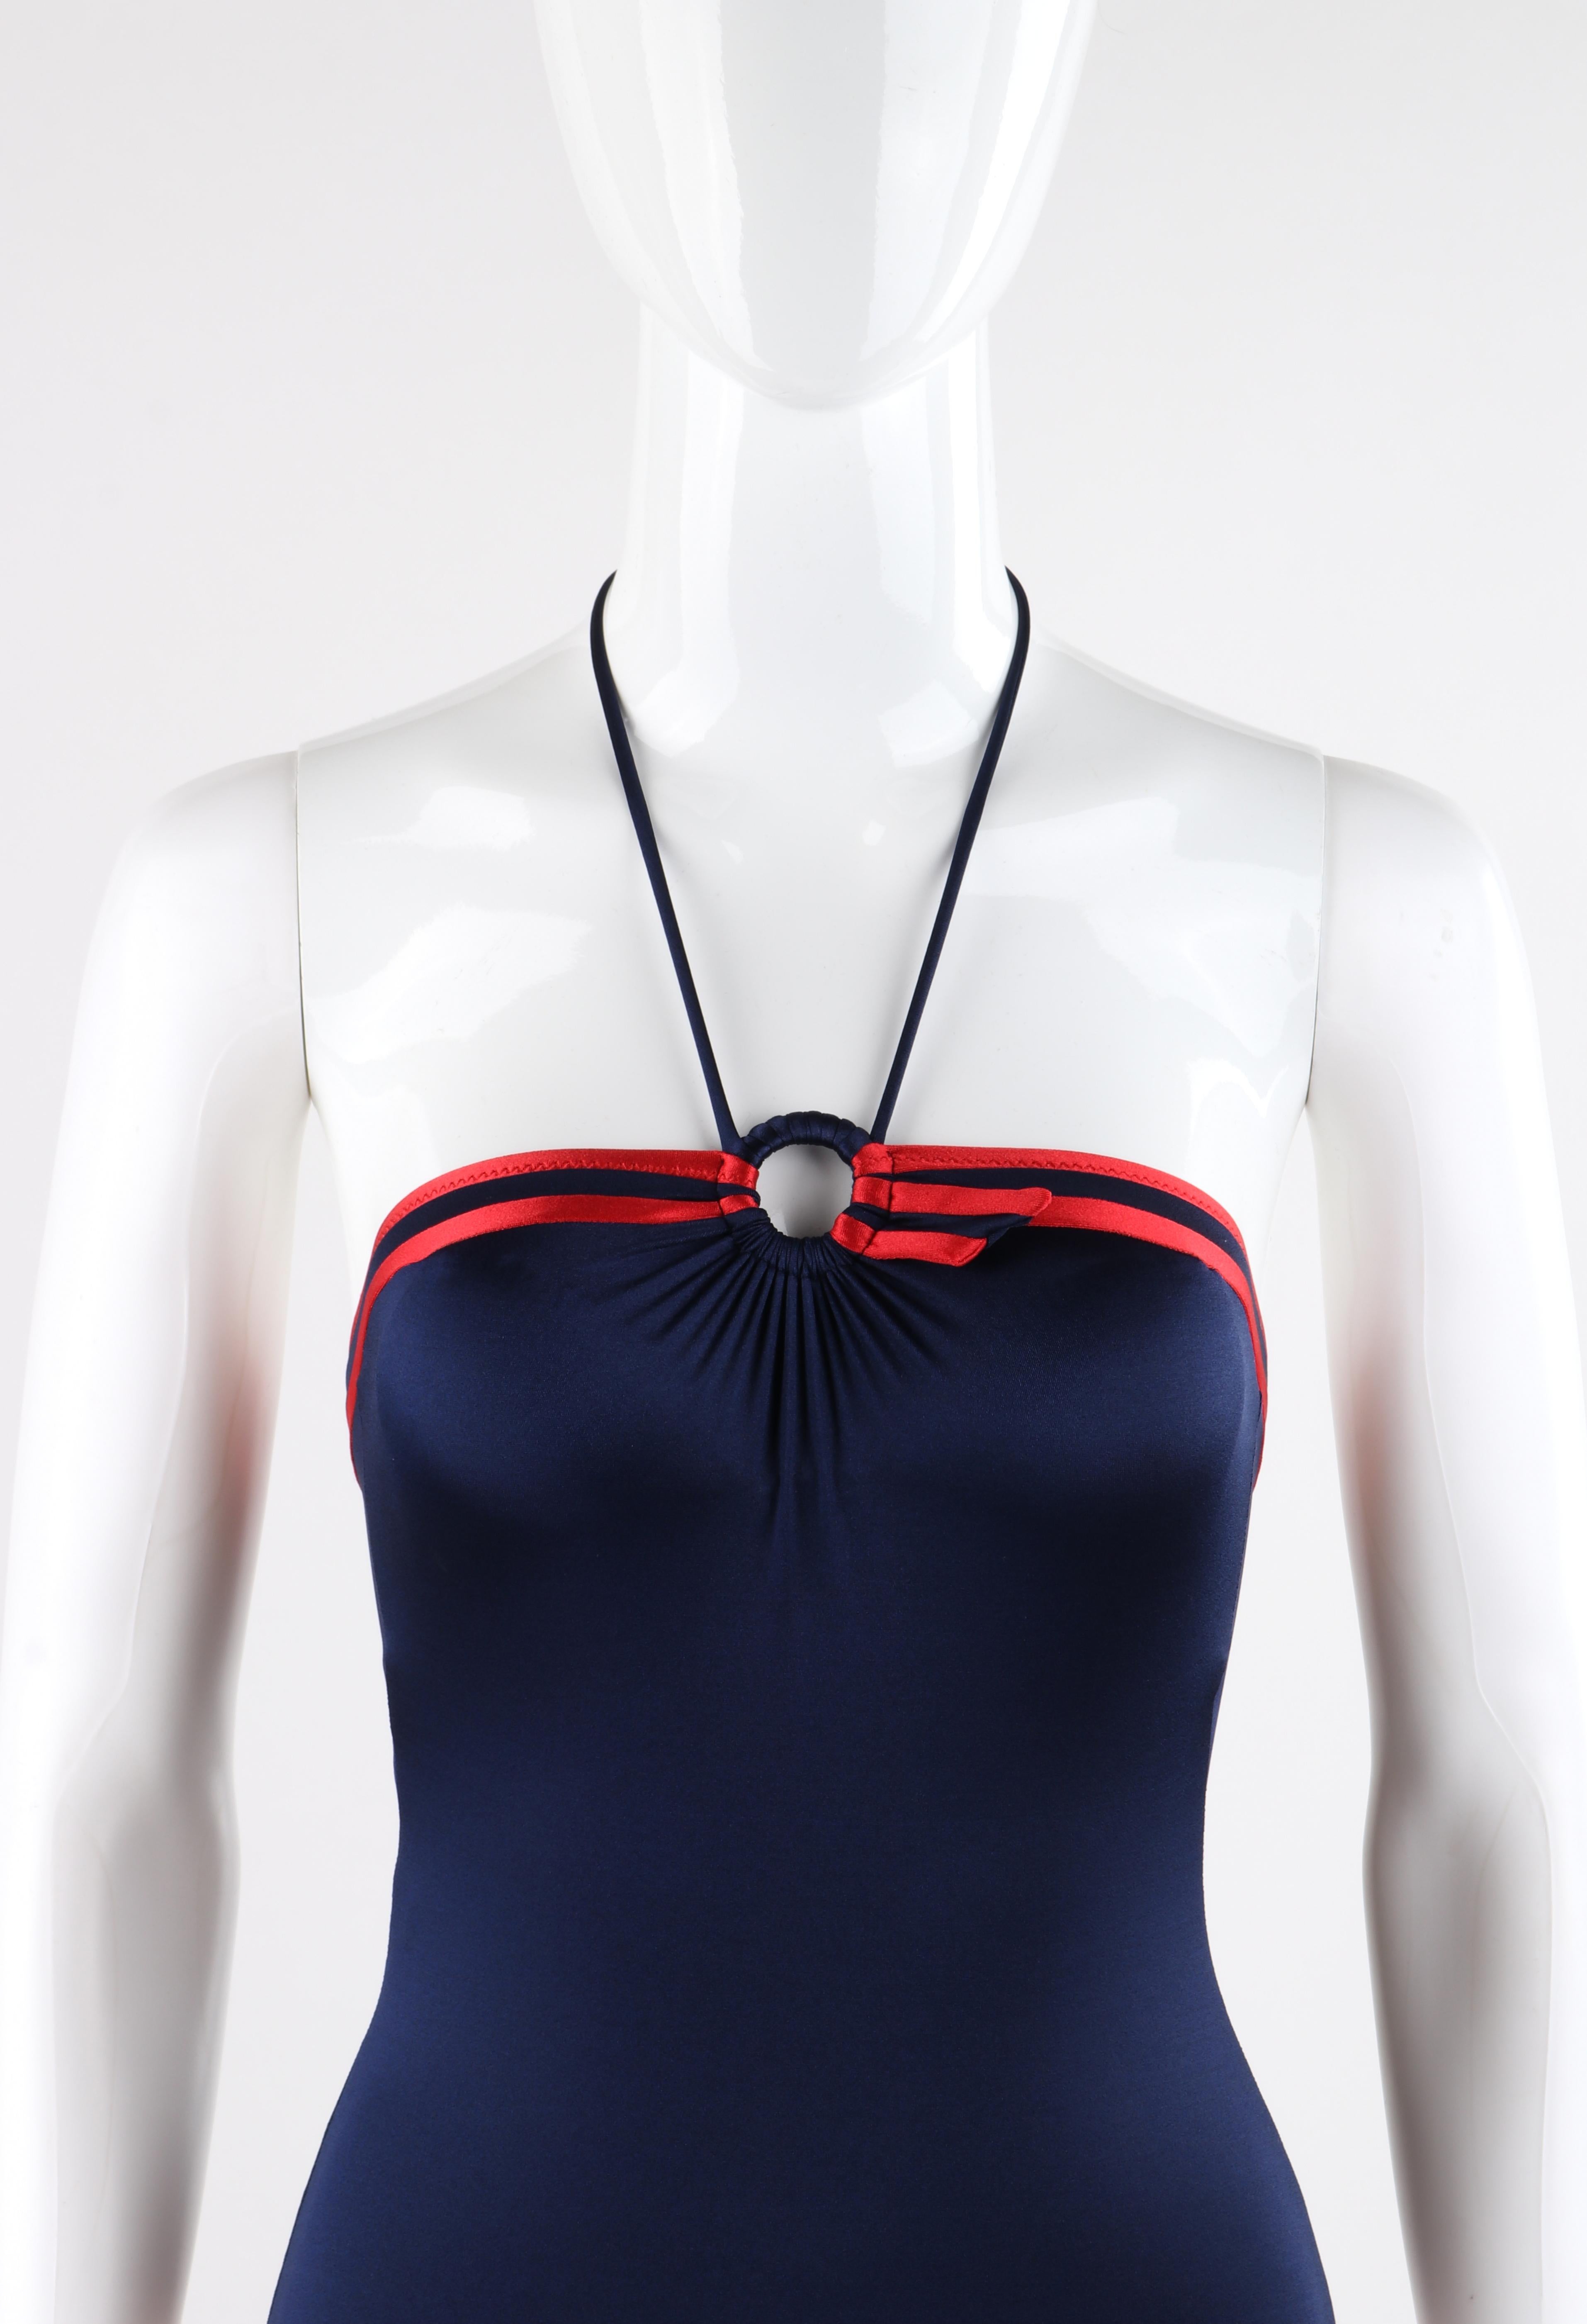 GUCCI c.1980’s Blue Red Trim High Hip Ring Halter One Piece Bathing Swim Suit 
 
Circa: 1980’s
Label(s): Gucci
Style: One piece halter bathing suit
Color(s): Blue and red 
Lined: No
Marked Fabric Content: “80% nylon, 20% elastane” “Lycra”
Unmarked